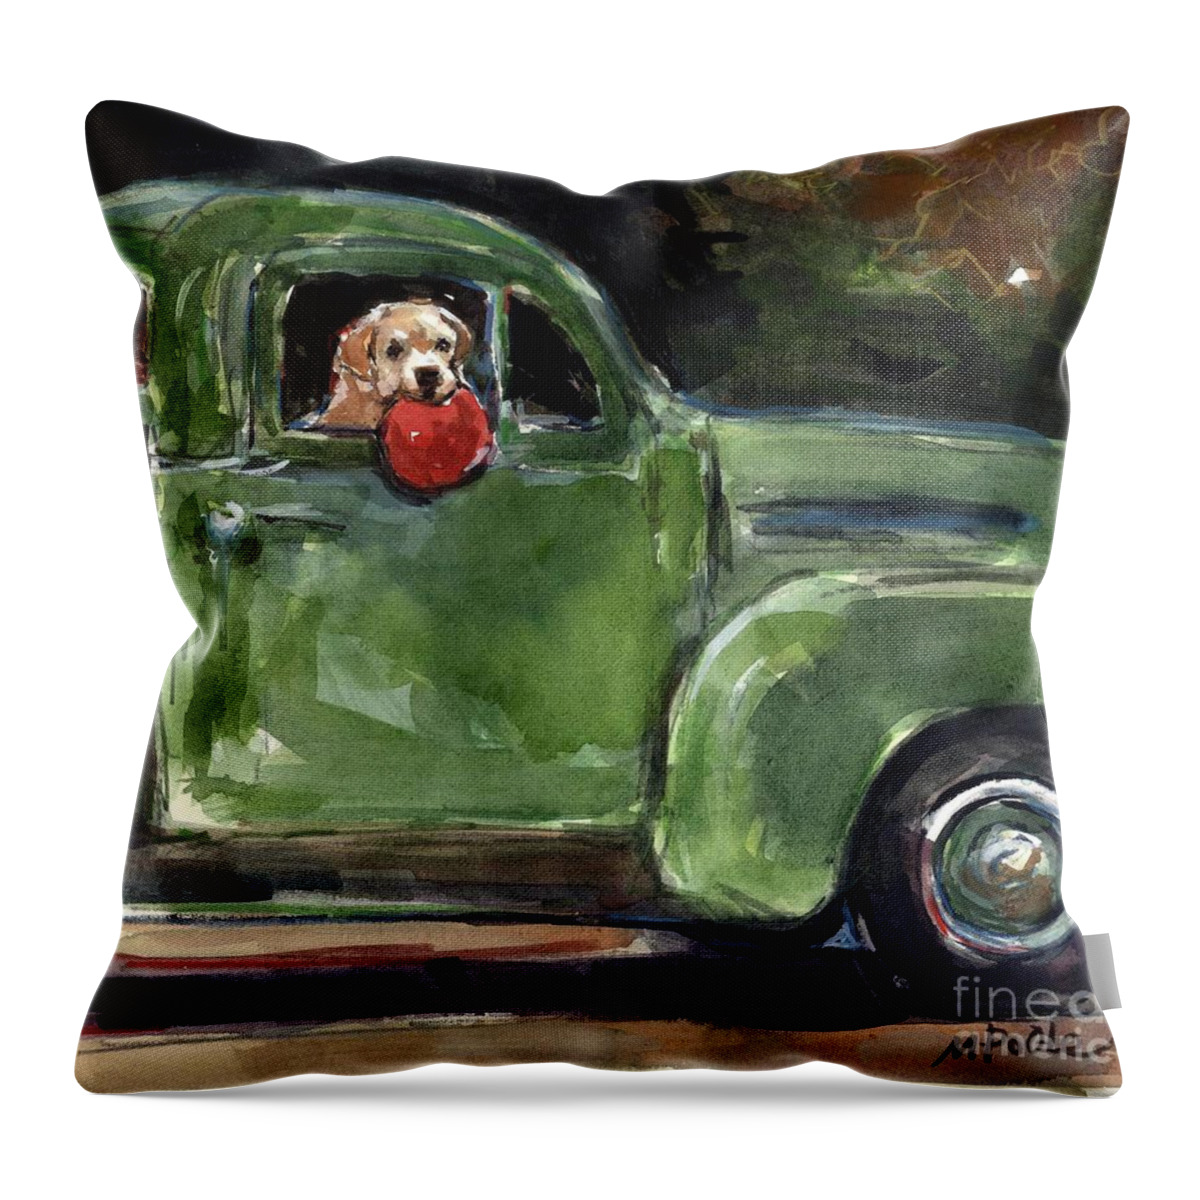 Vintage Truck Throw Pillow featuring the painting Wham-o by Molly Poole